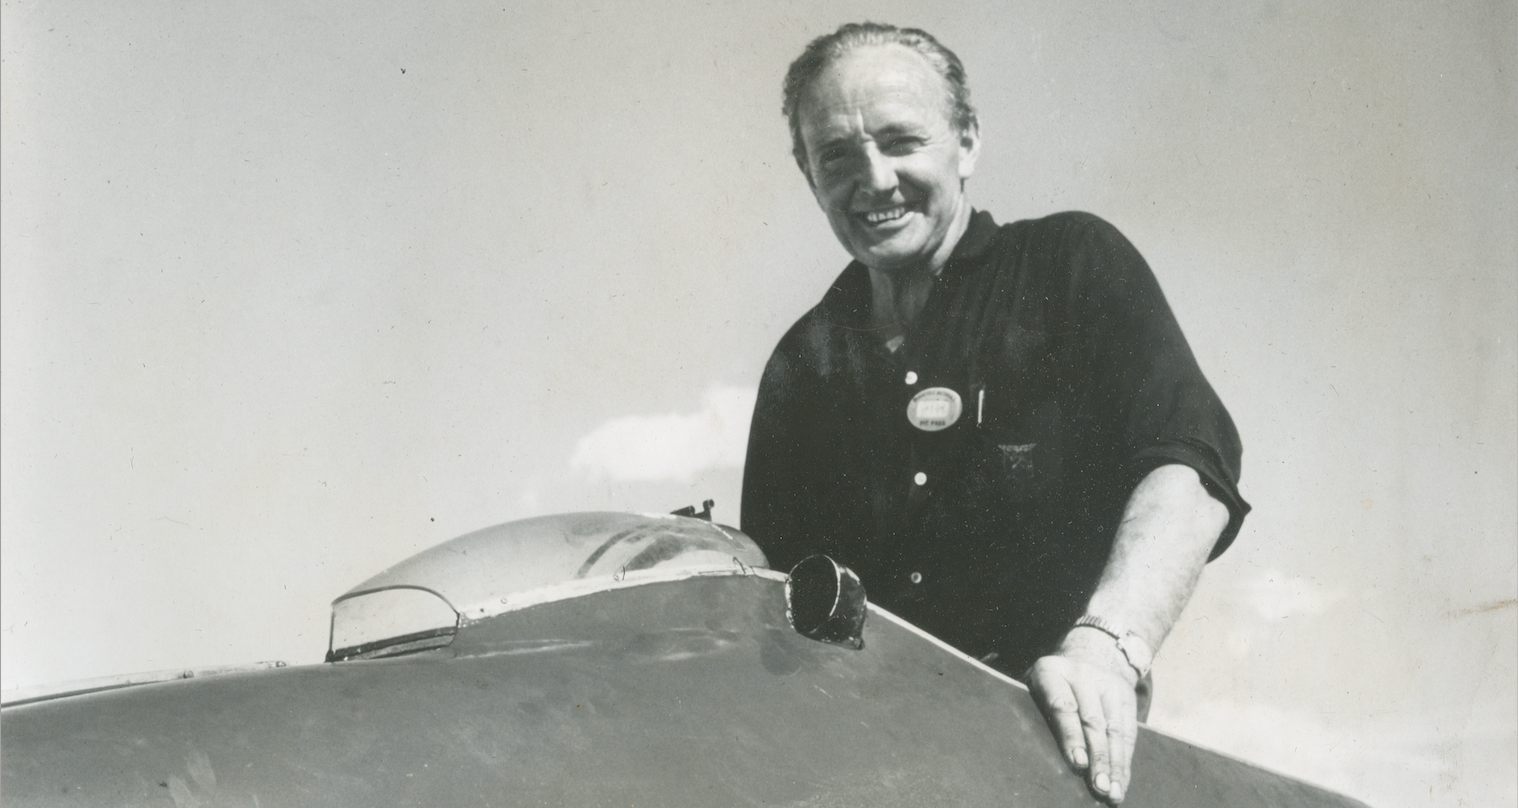 Burt Munro has been inducted into the Sturgis Motorcycle Museum Hall of Fame